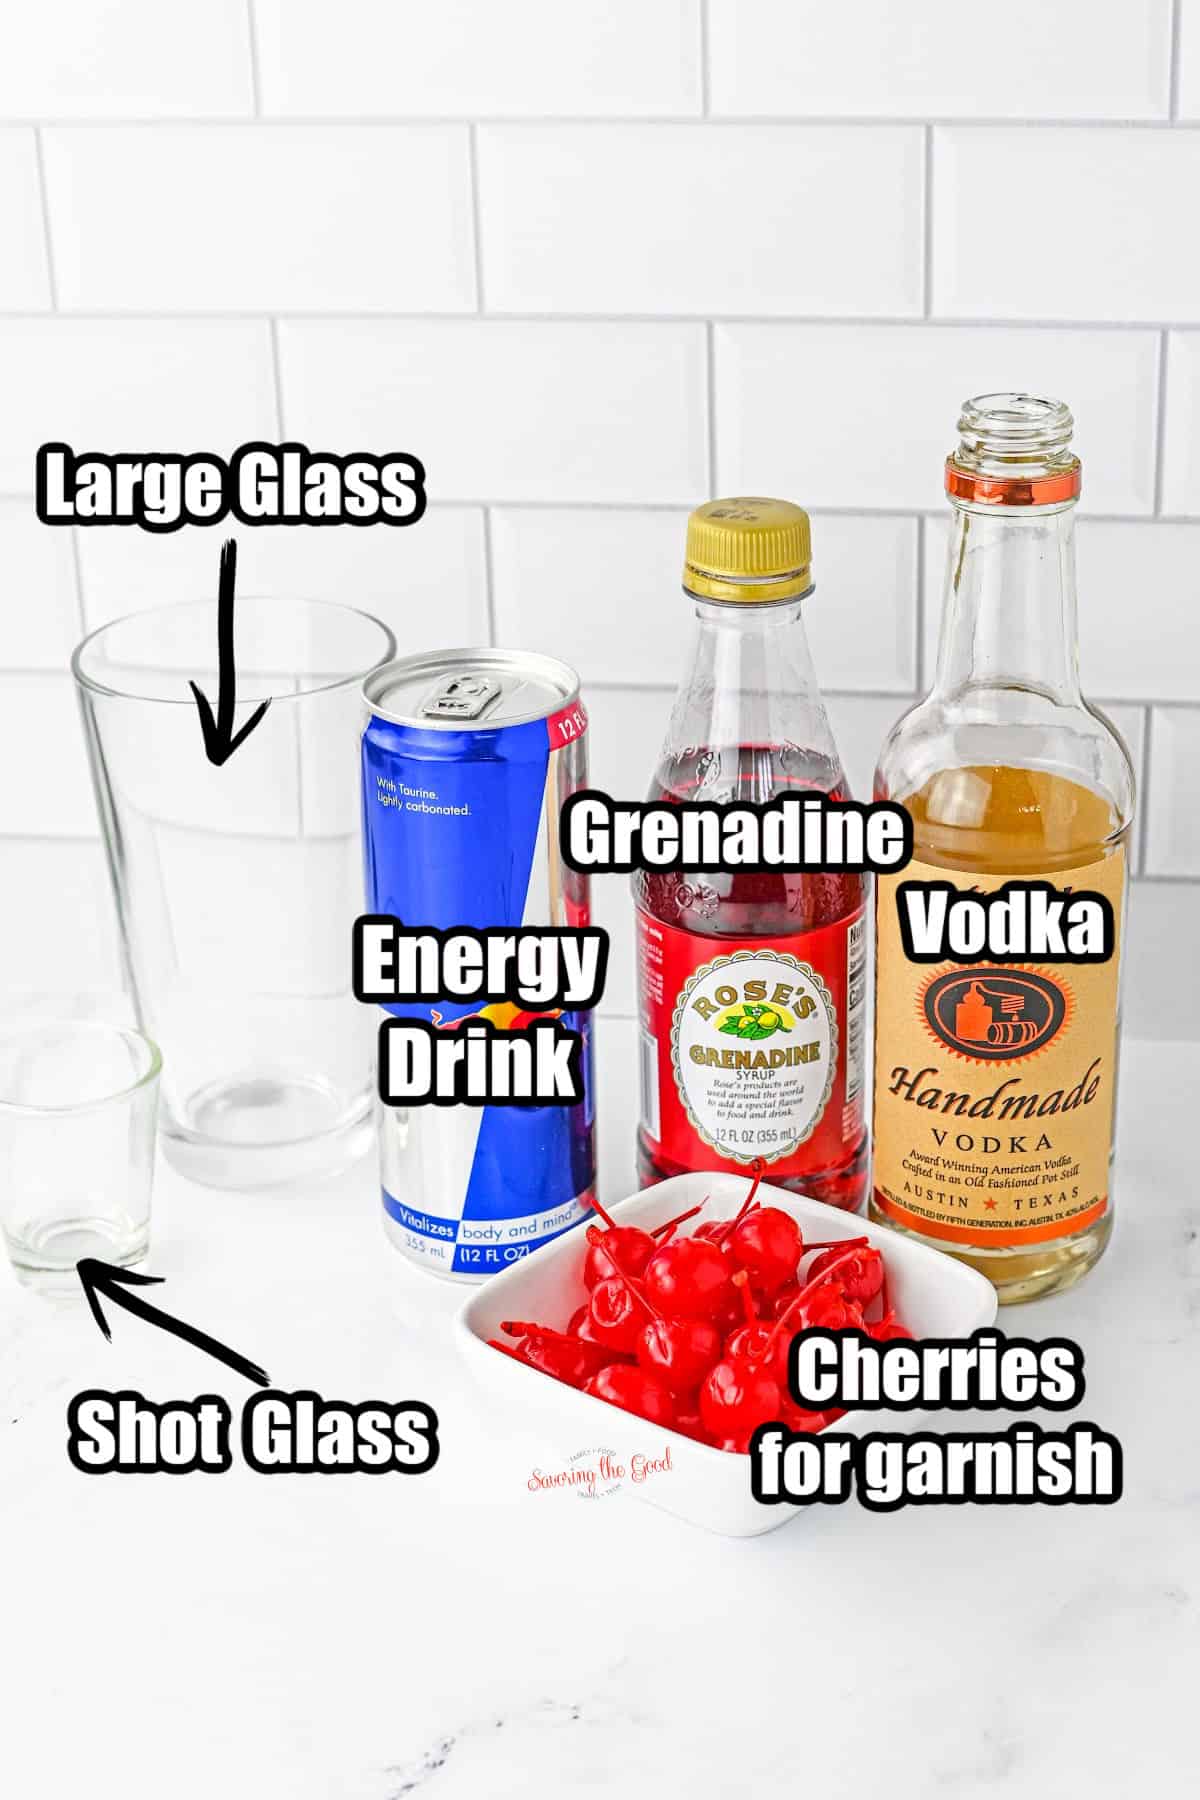 ingredients to make a cherry bomb shot cocktail energy drink, frenadine, vodka, cherries for garnish a large glass and a shot glass. all with text overlays.